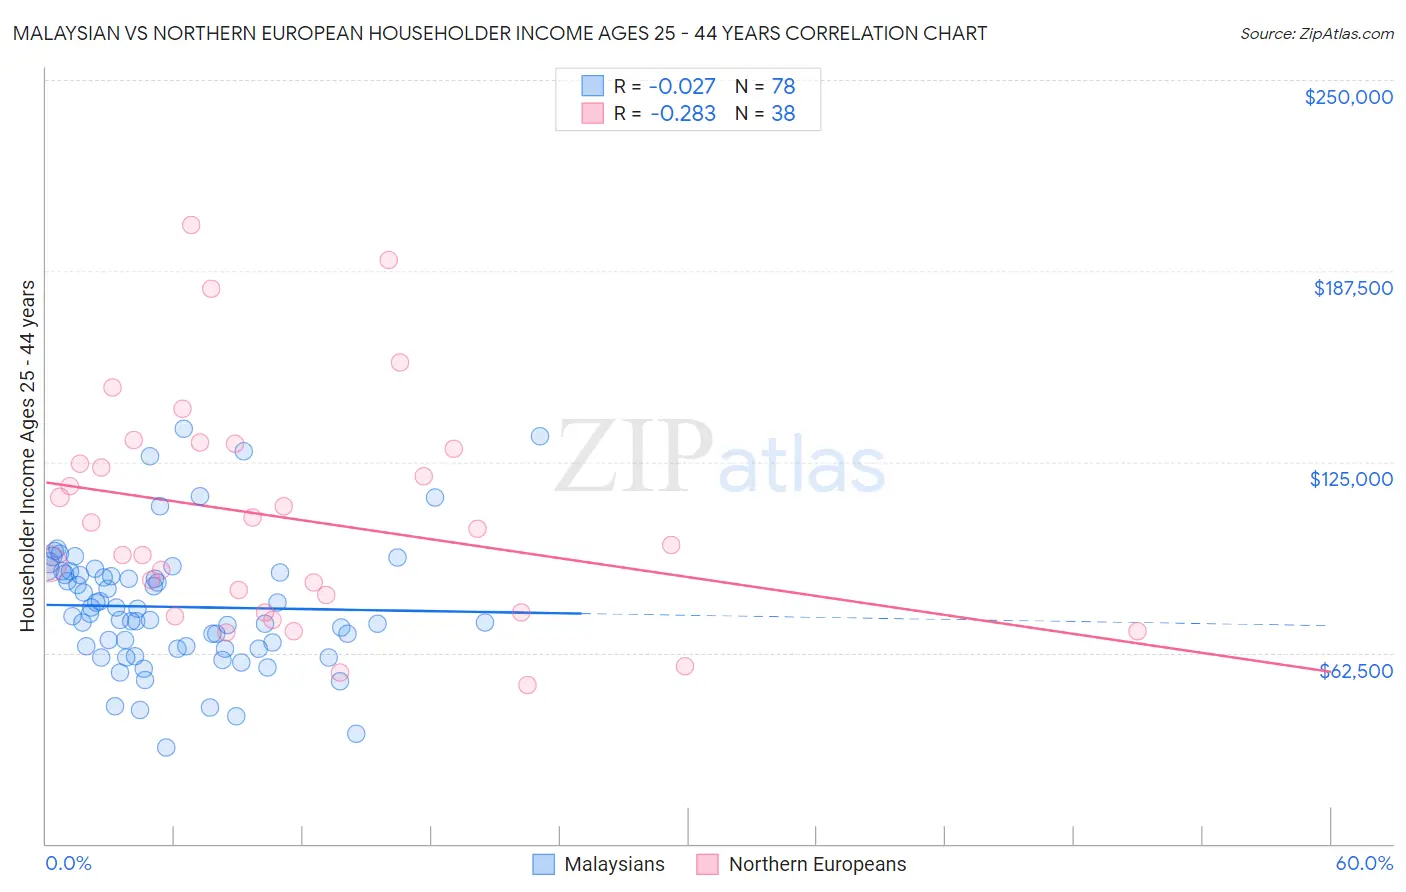 Malaysian vs Northern European Householder Income Ages 25 - 44 years